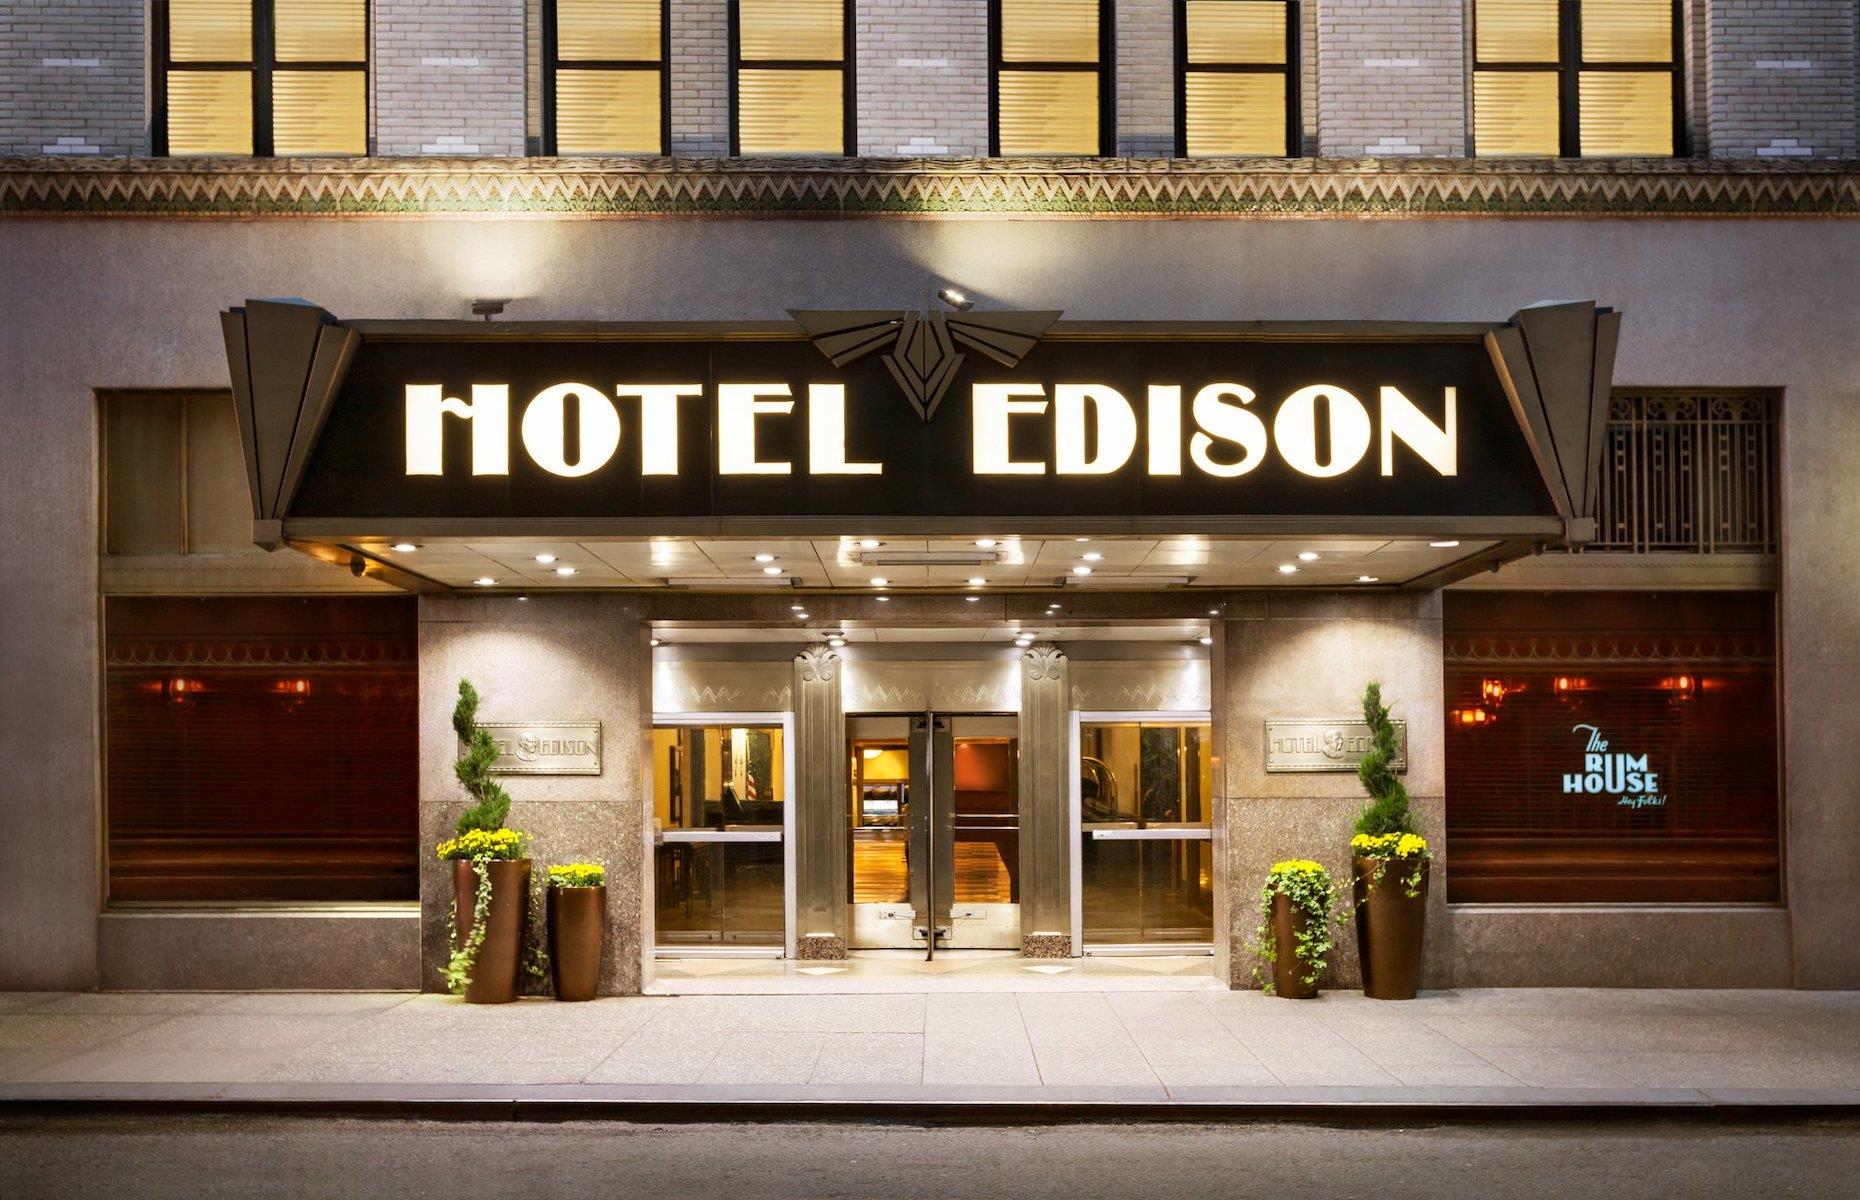 <p>An Art Deco diamond on Times Square, <a href="https://www.edisonhotelnyc.com">Hotel Edison</a> opened its doors in 1931 with its inventor namesake switching on the marquee lights himself. It was one of the first Art Deco hotels in the Theater District and its Edison Ballroom swiftly became a hub for socializing. The handsome heritage building has since had star turns in films including <em>The Godfather</em> and <em>Birdman</em>. The Edison's connections to the Jazz Age are still palpable, especially in its The Rum House, a dark and moody joint where live jazz keeps the tradition going.</p>  <p><a href="https://www.loveexploring.com/galleries/158166/big-apple-secrets-the-unbelievable-history-of-new-york-city?page=1"><strong>Now check out the unbelievable history and secrets of New York City</strong></a></p>